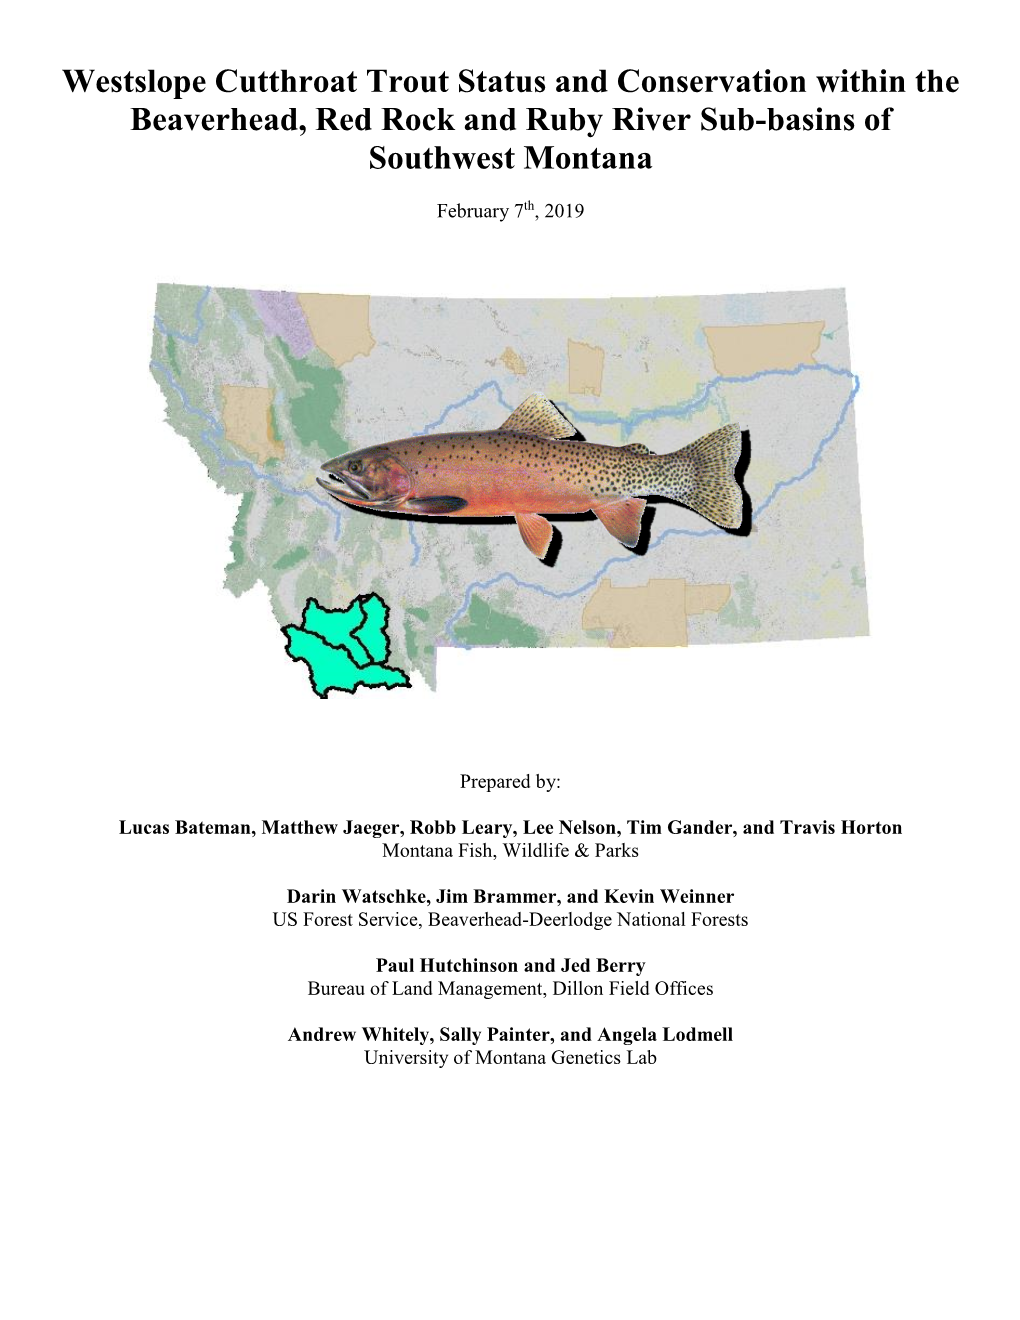 Westslope Cutthroat Trout Status and Conservation Within the Beaverhead, Red Rock and Ruby River Sub-Basins of Southwest Montana